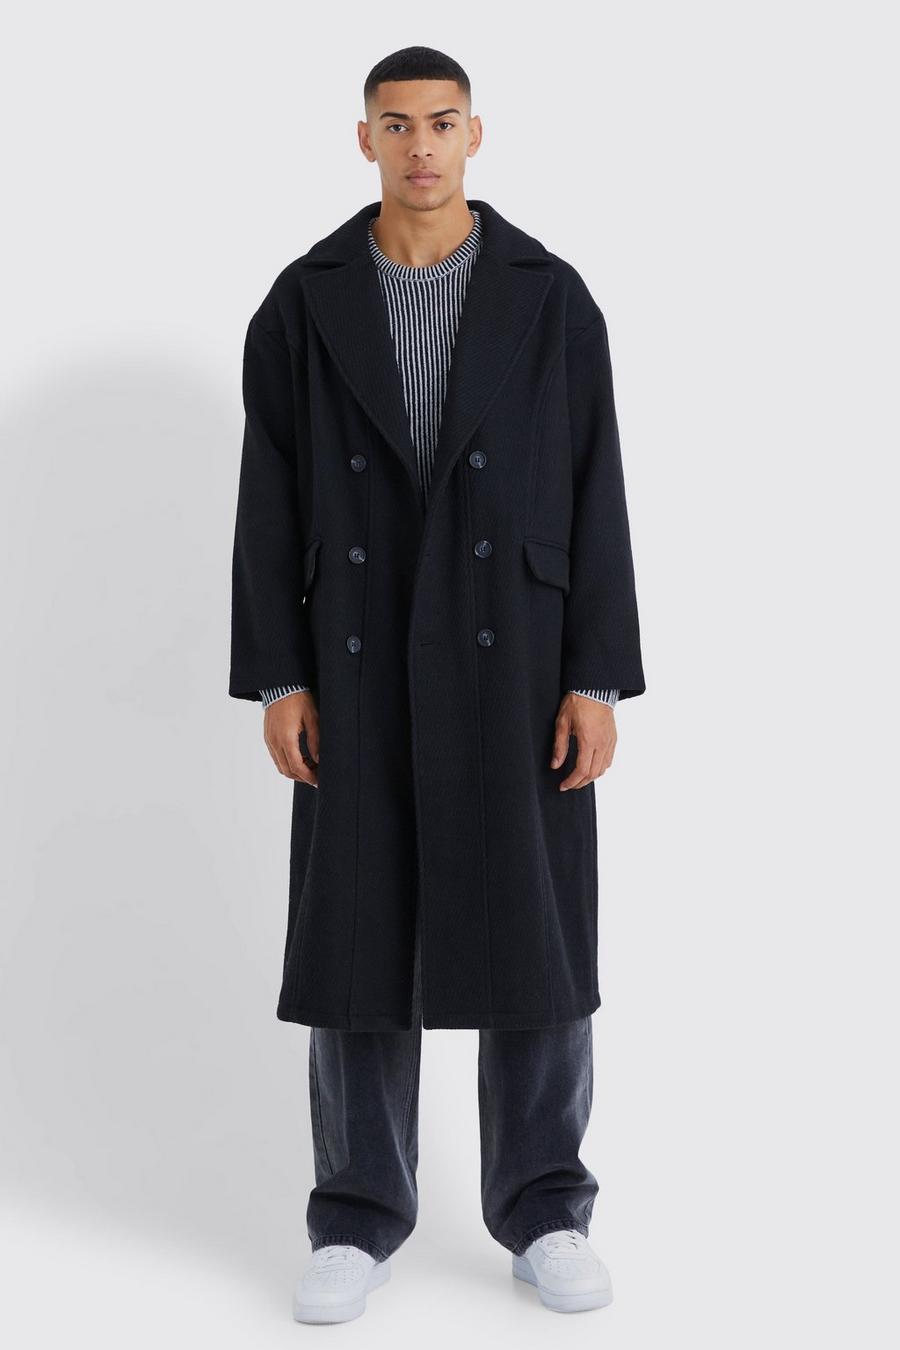 Black Wool Look Double Breasted Textured Overcoat image number 1